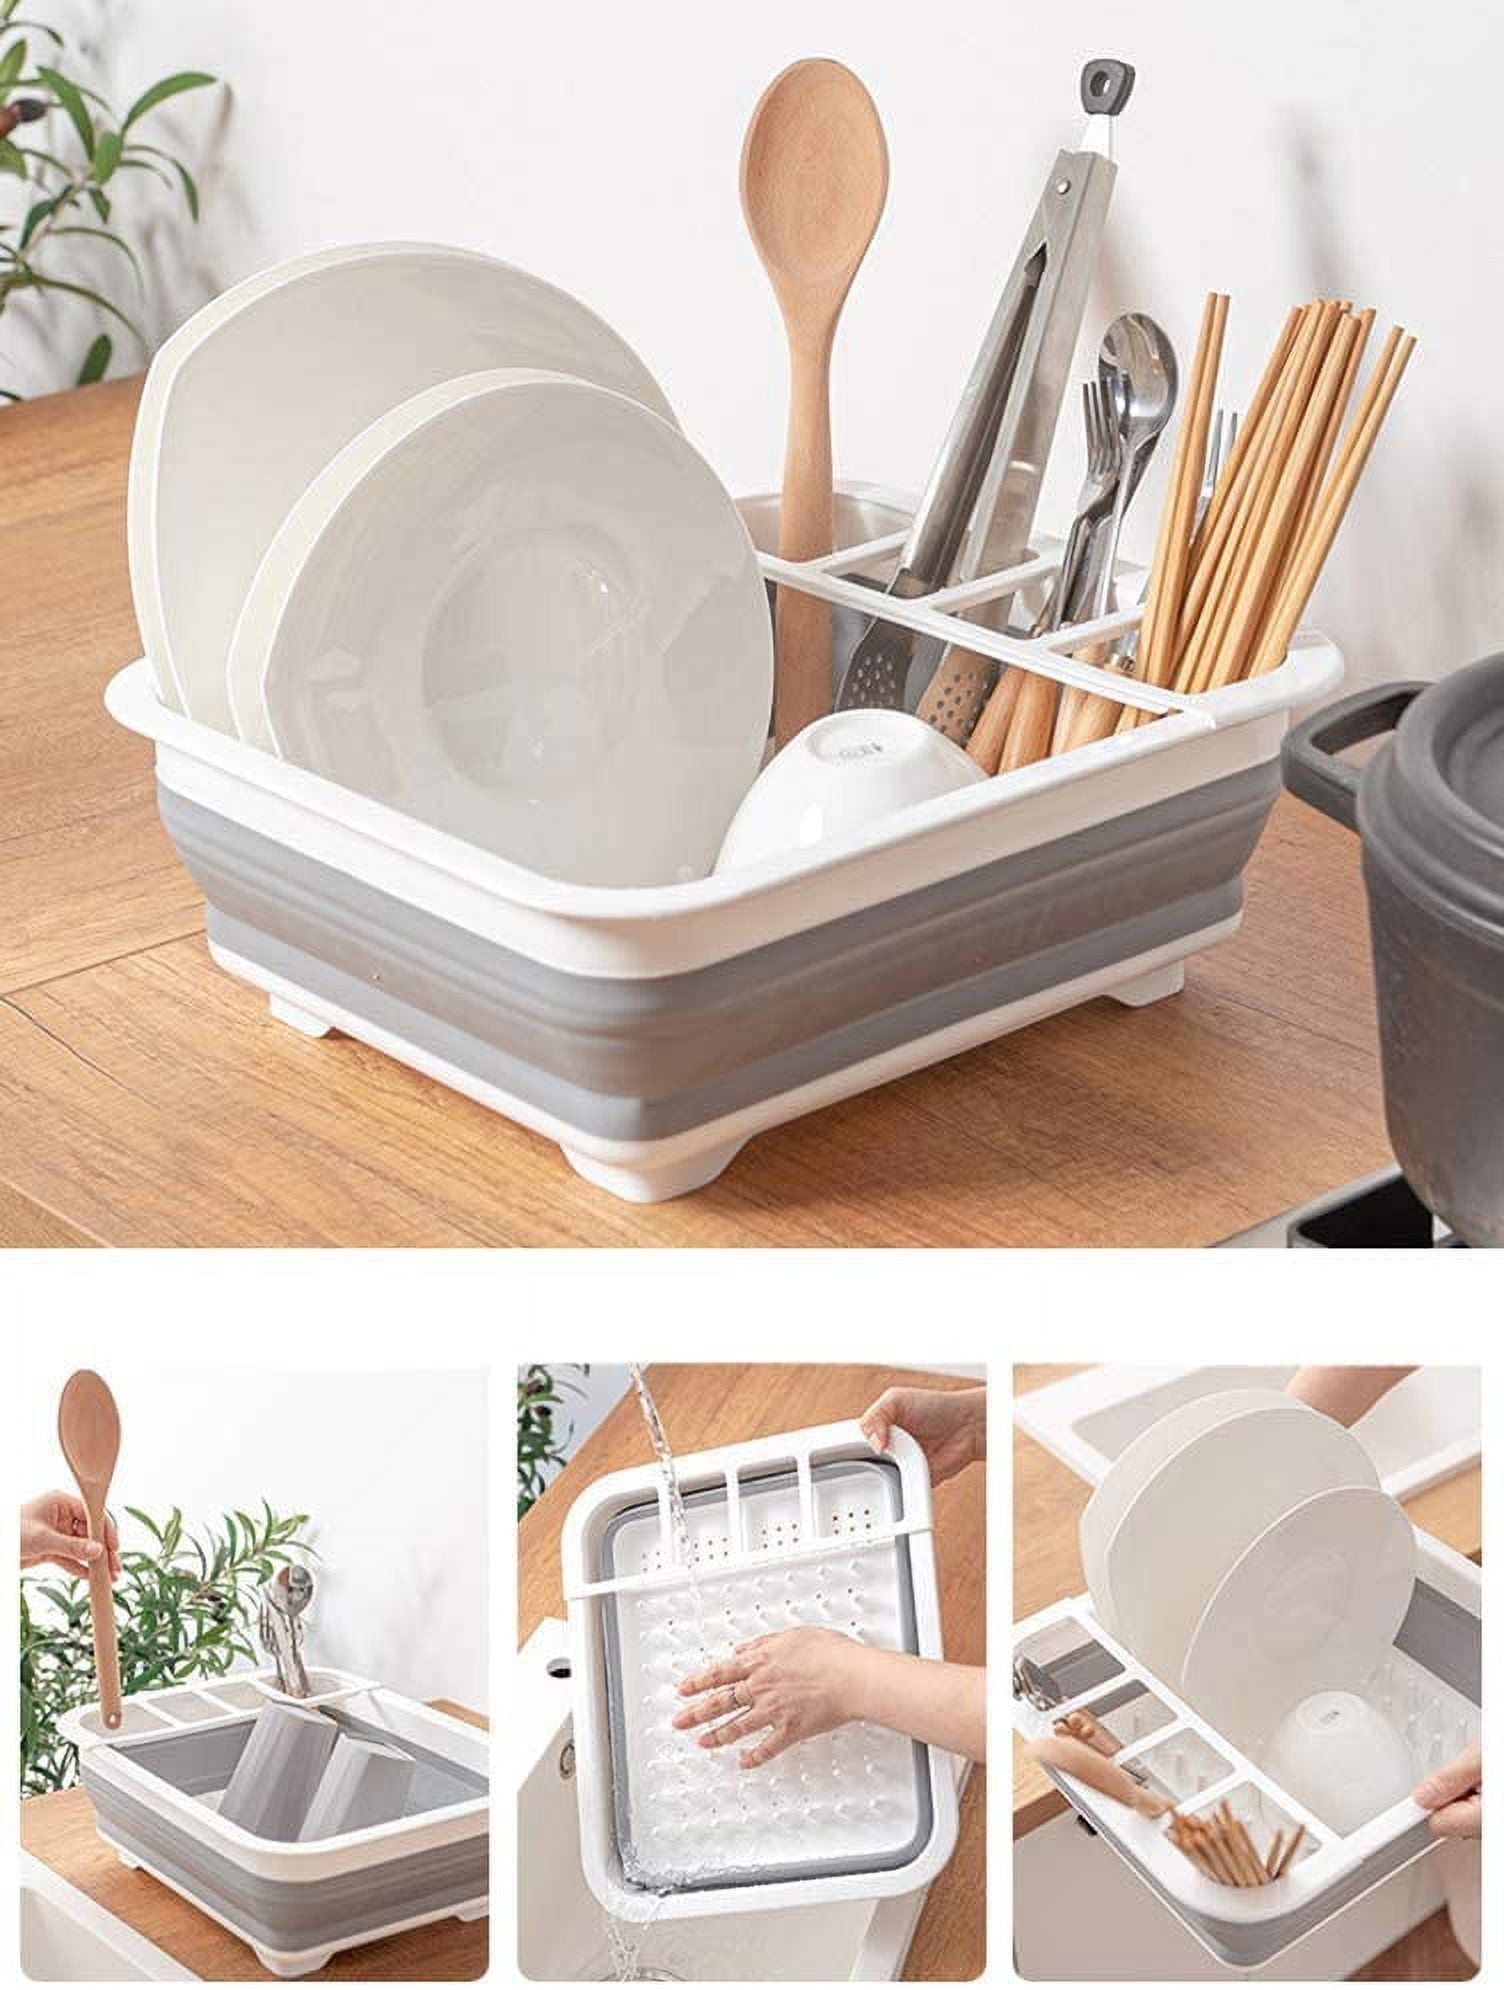 Mlfire Collapsible Dish Drying Rack with Drainboard Tray Popup and Collapse for Easy Storage Portable Kitchen Storage Organizer RV Inside Accessories